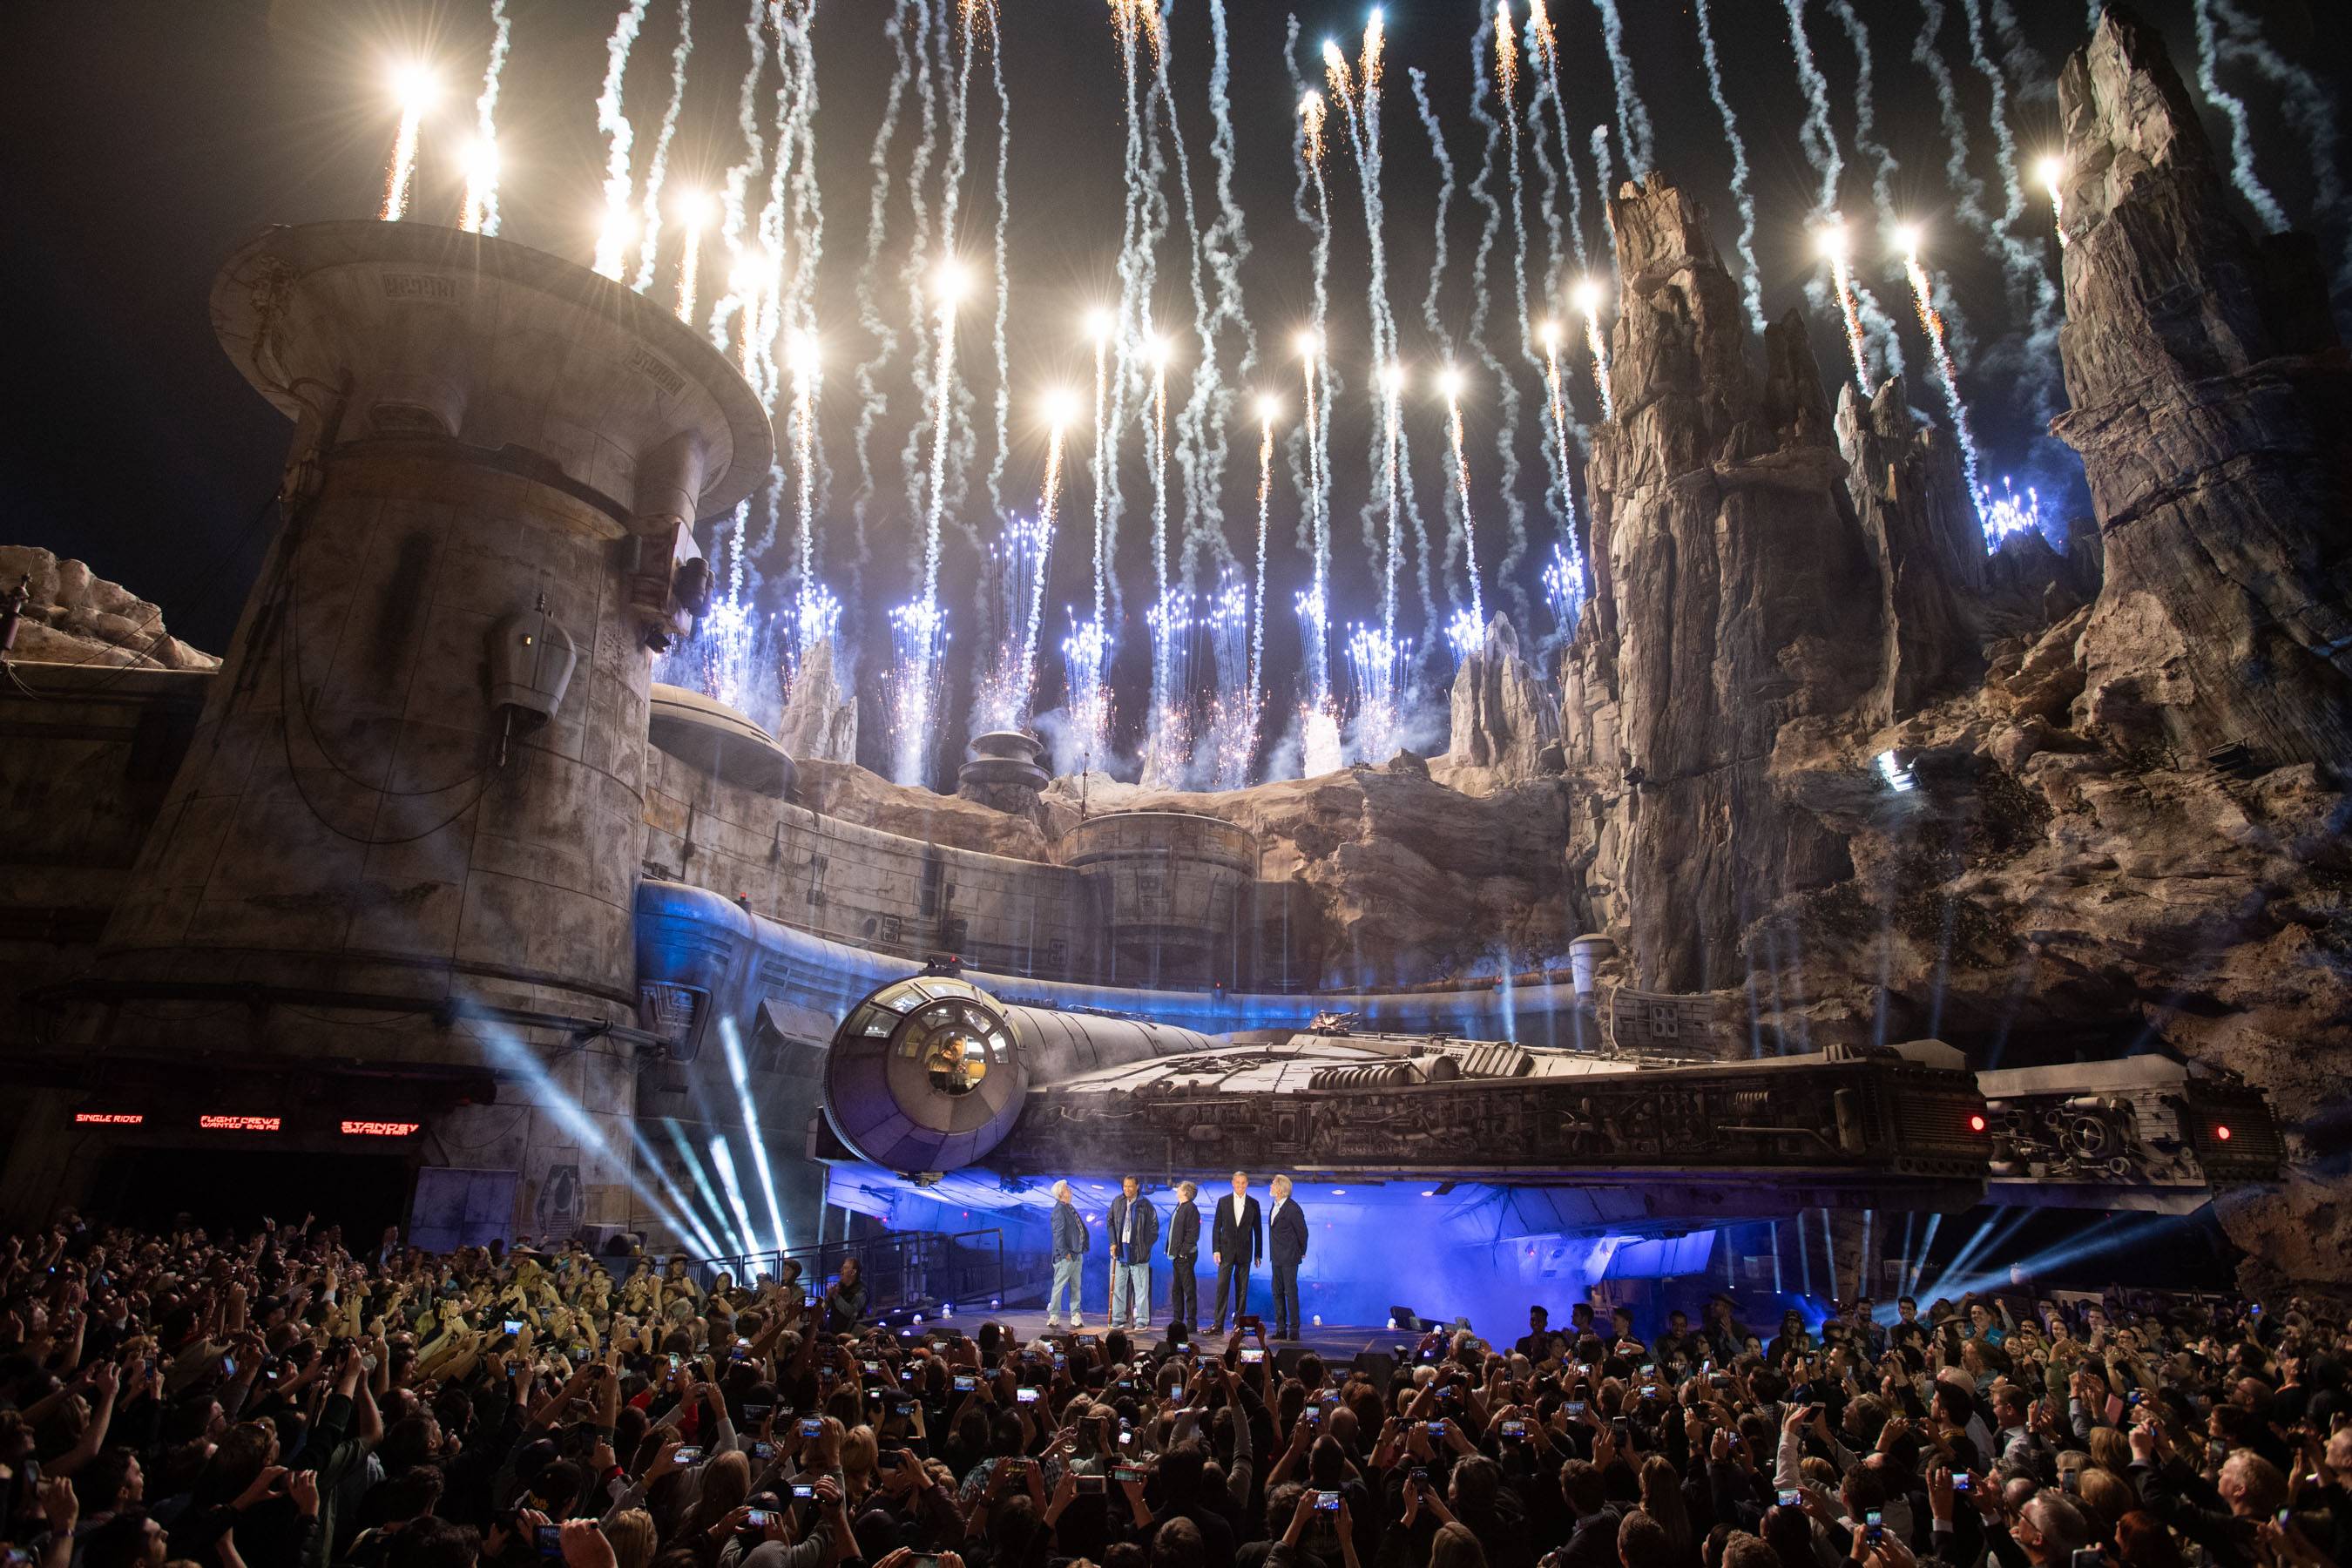 VIDEO - George Lucas, Harrison Ford, Mark Hamill and Billy Dee Williams appear at the grand opening of Star Wars Galaxy's Edge in Disneyland